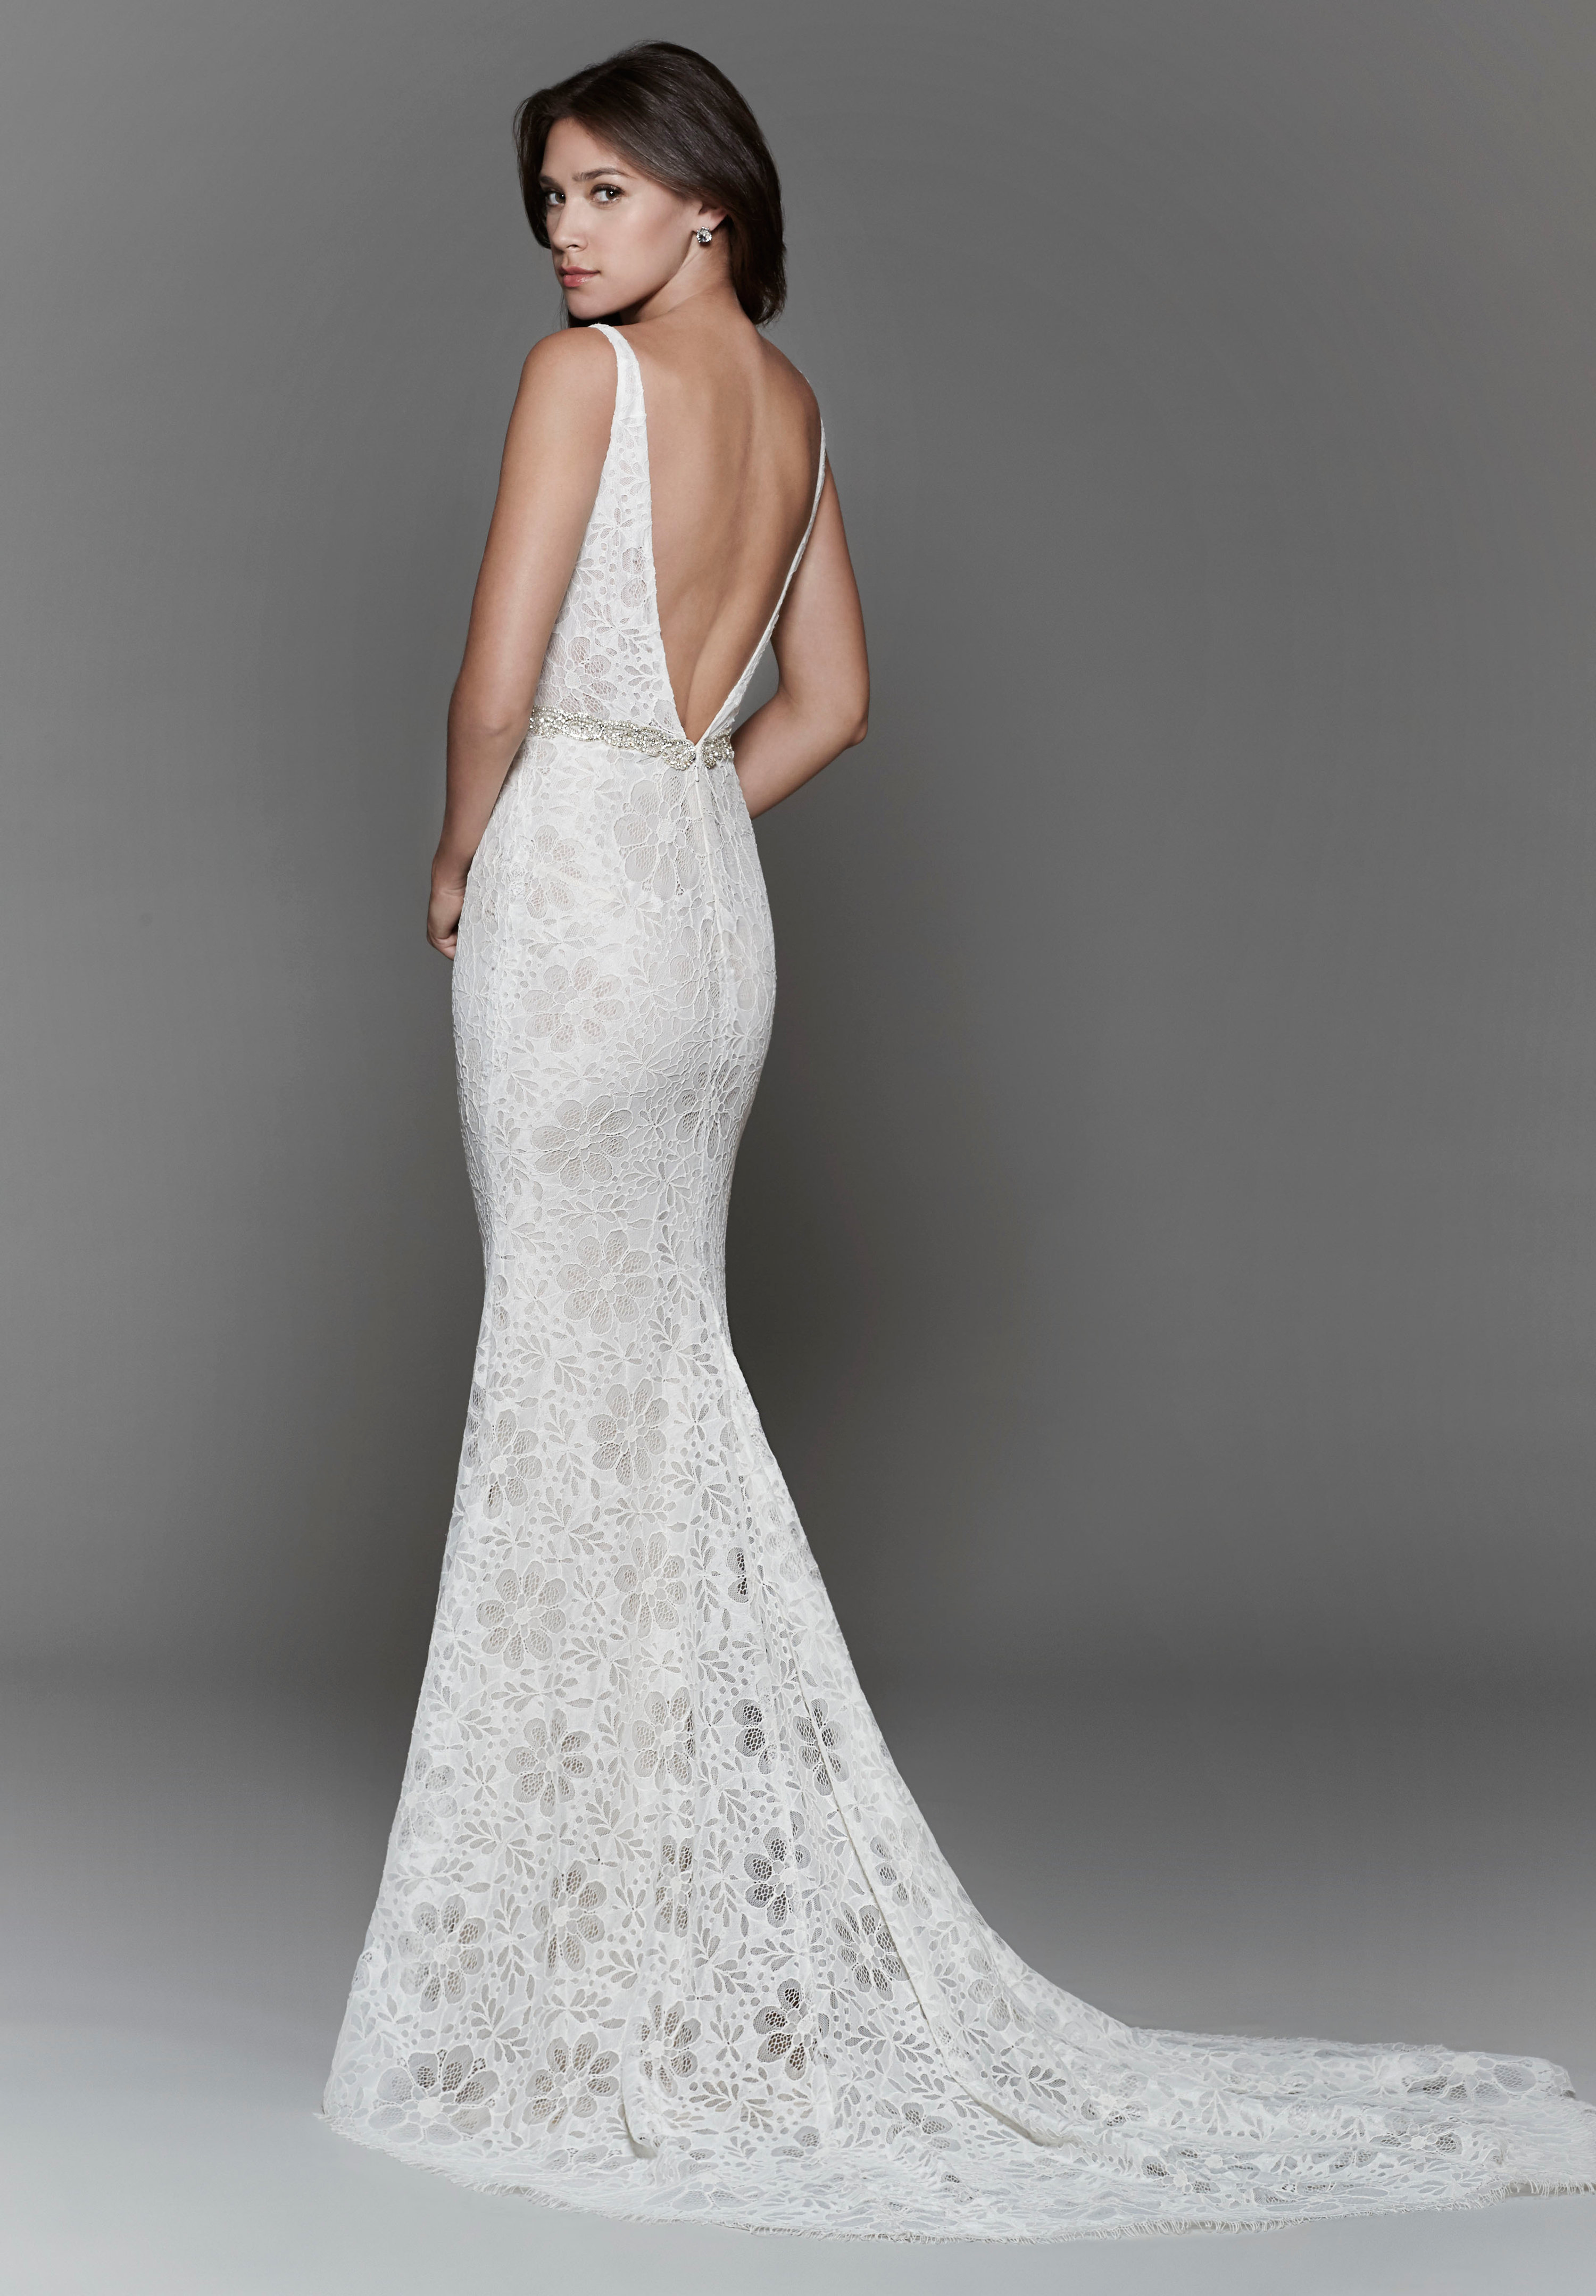 Bridal Gowns and Wedding Dresses by JLM Couture - Style 2706